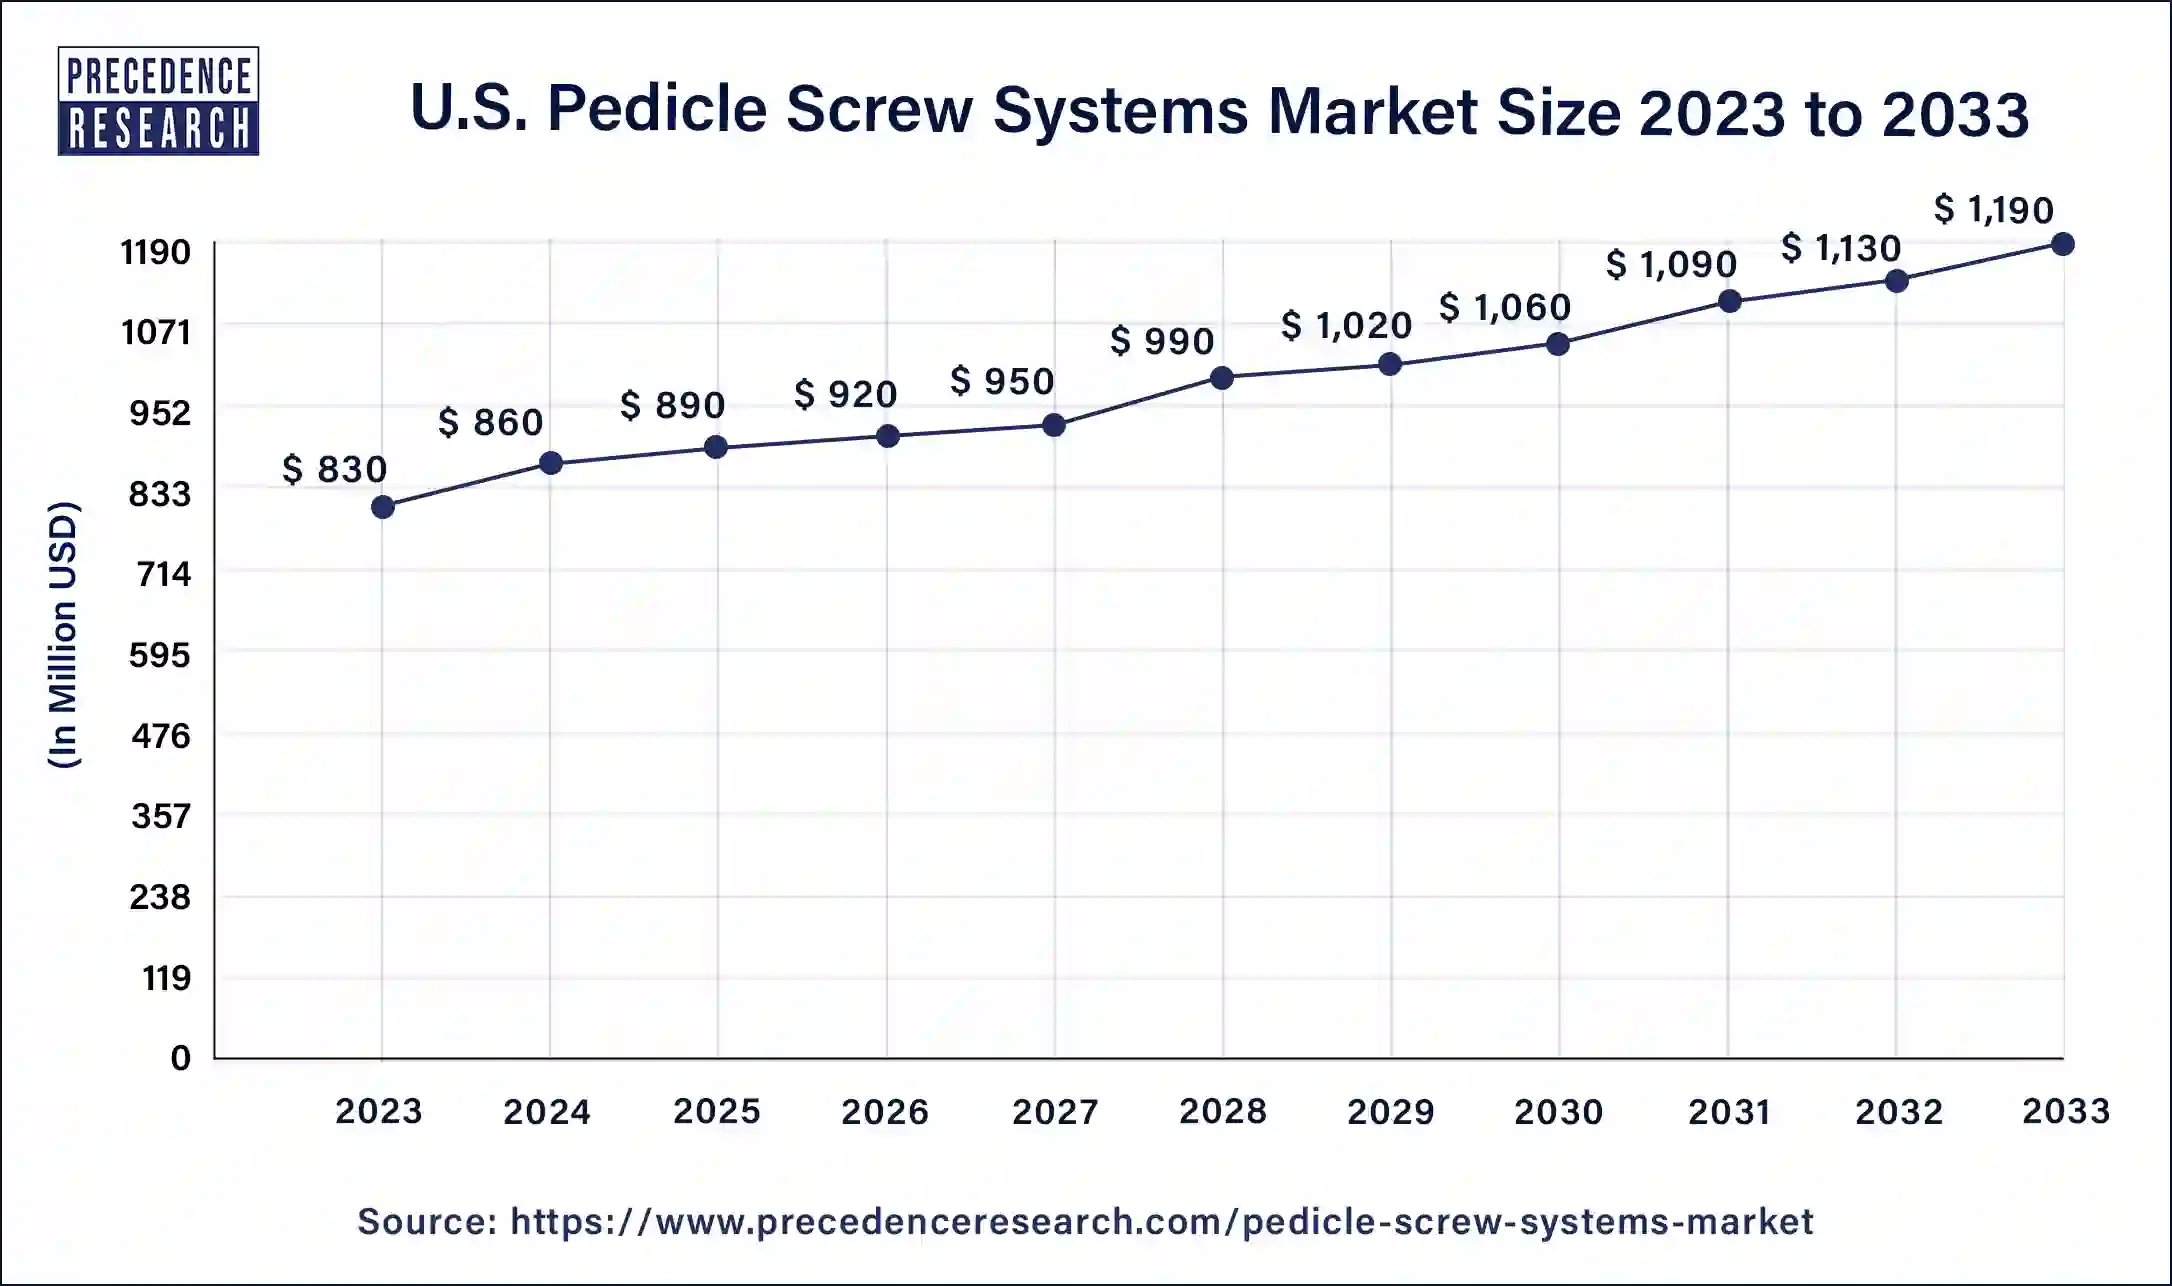 U.S. Pedicle Screw Systems Market Size 2023 to 2033